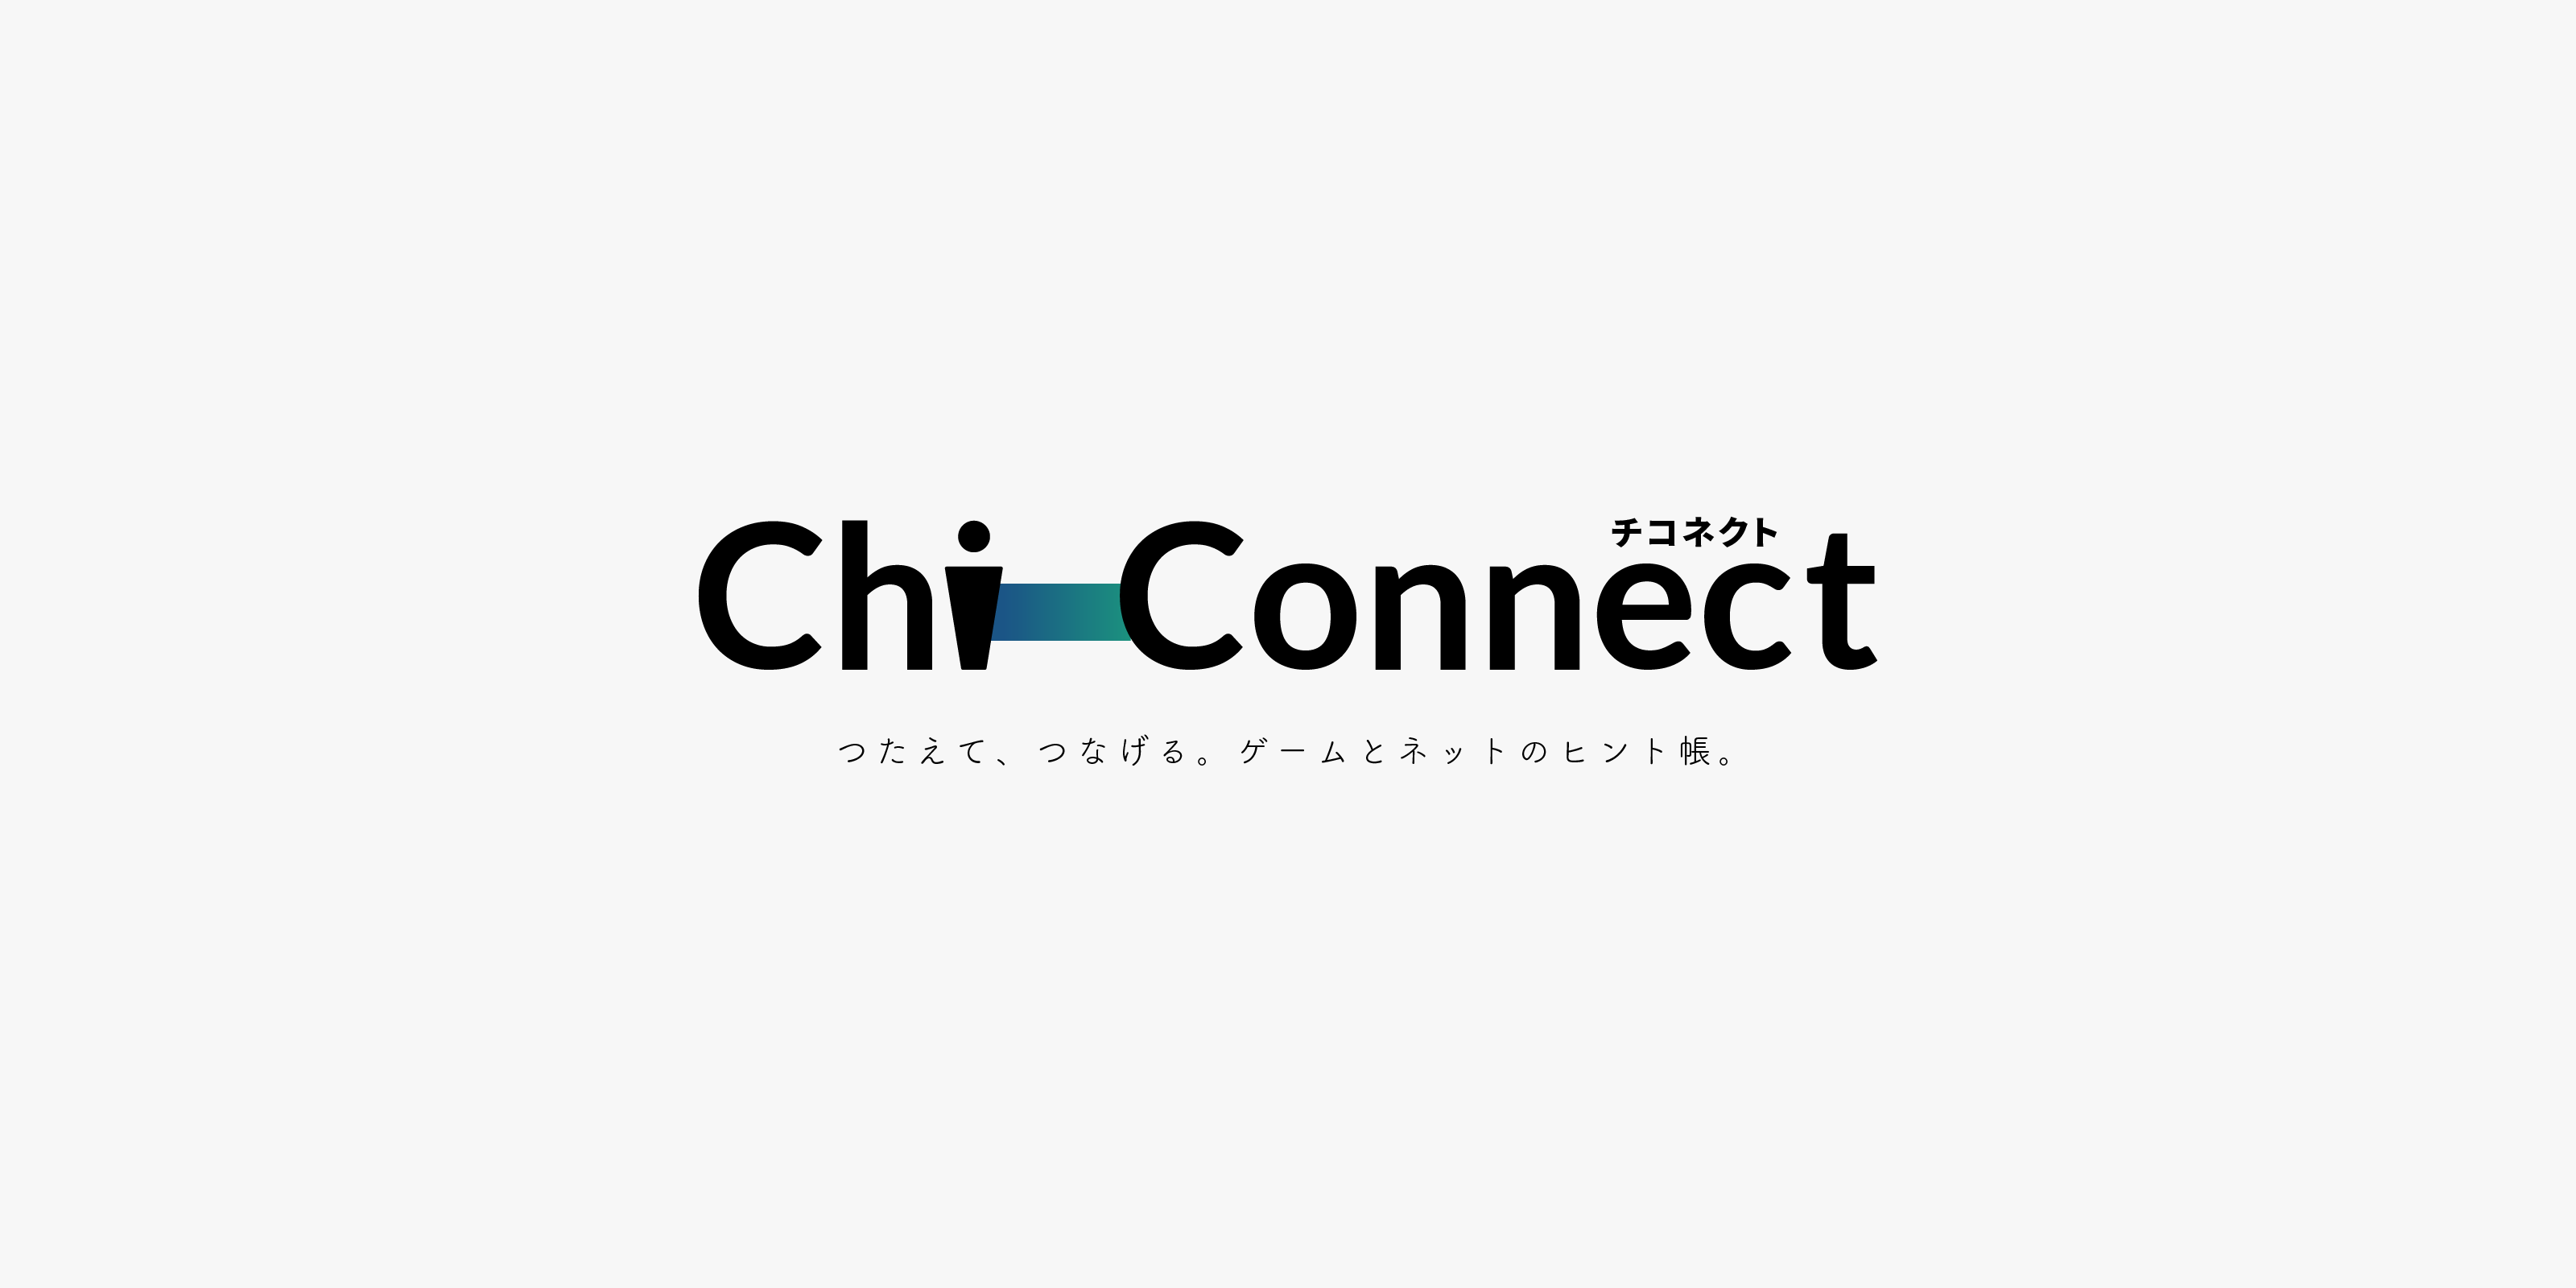 Chi-Connect